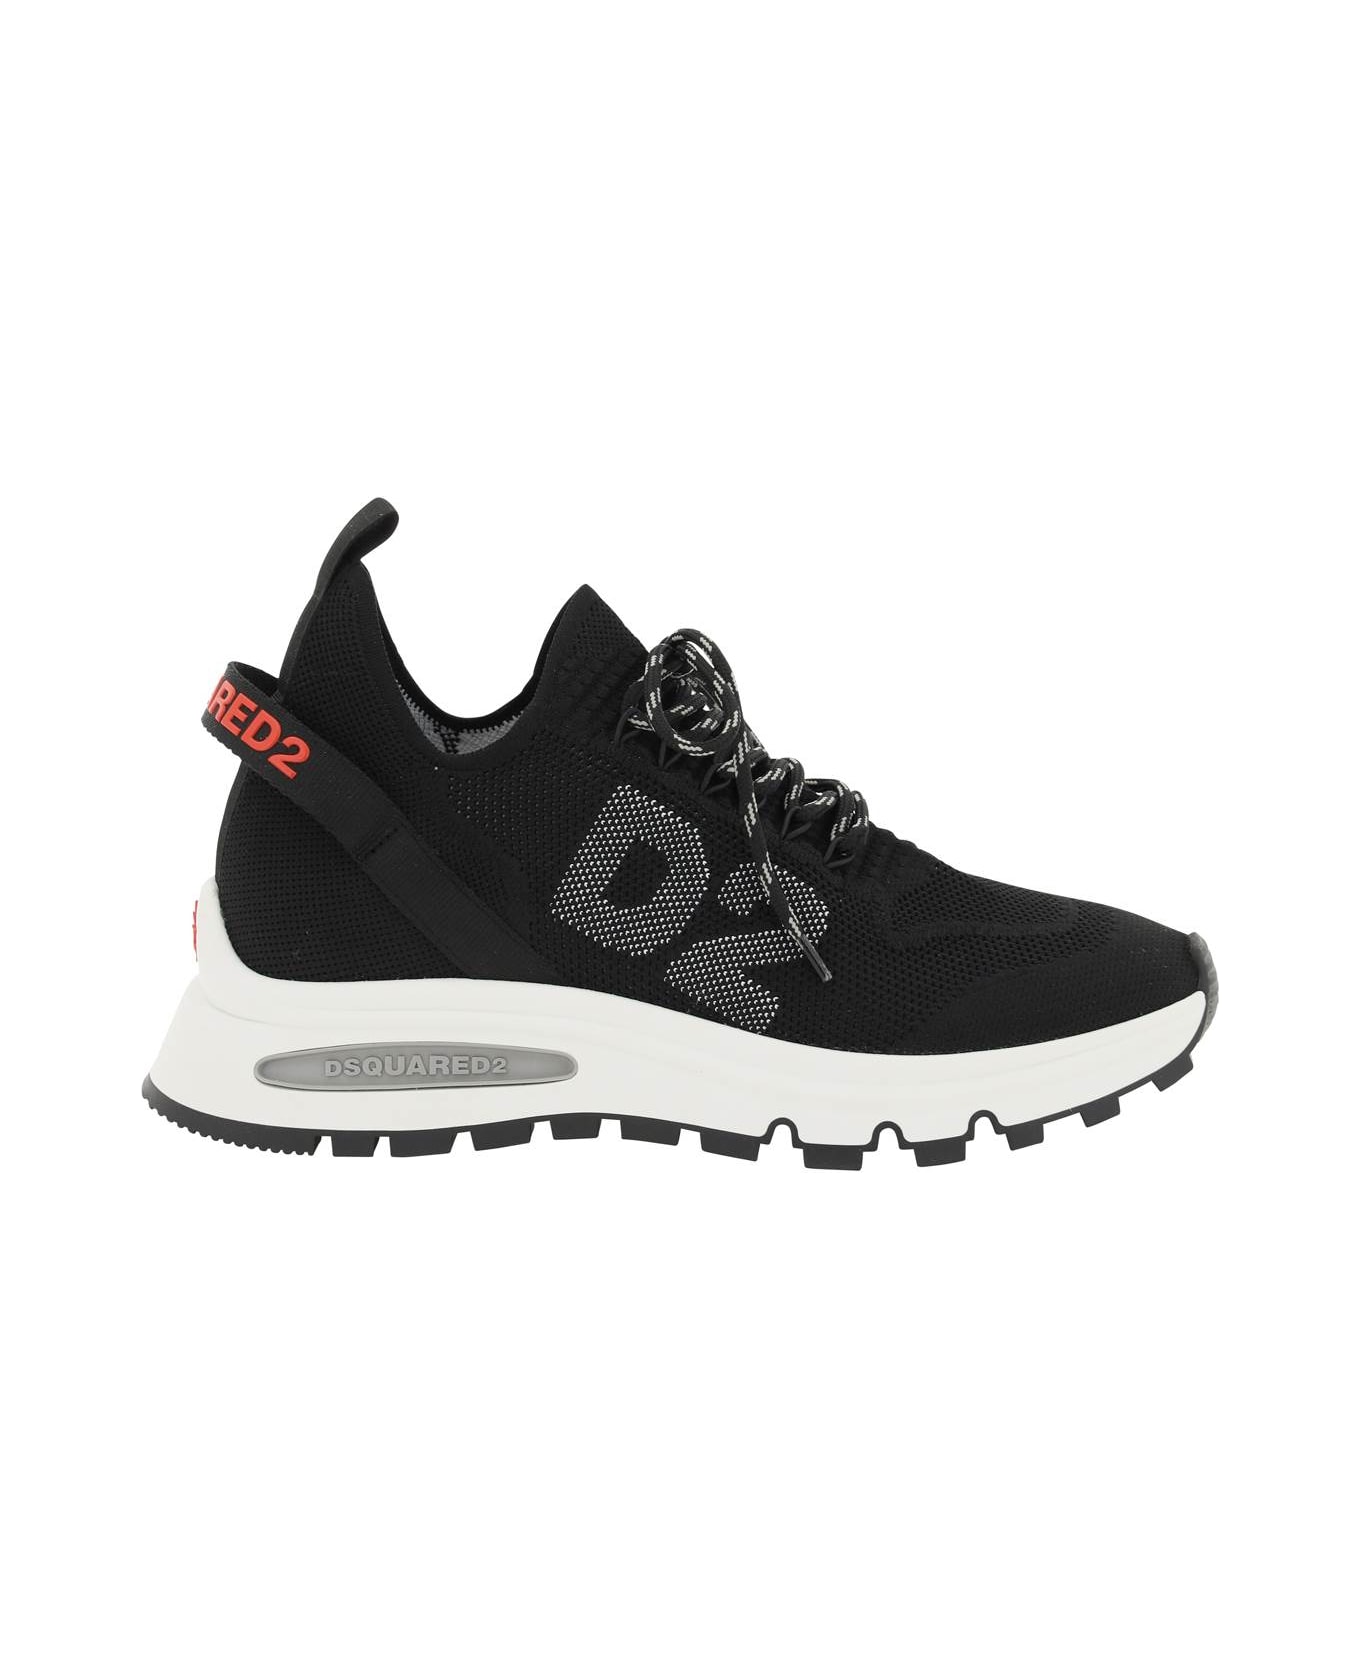 Dsquared2 Run Ds2 Sneakers - 2124